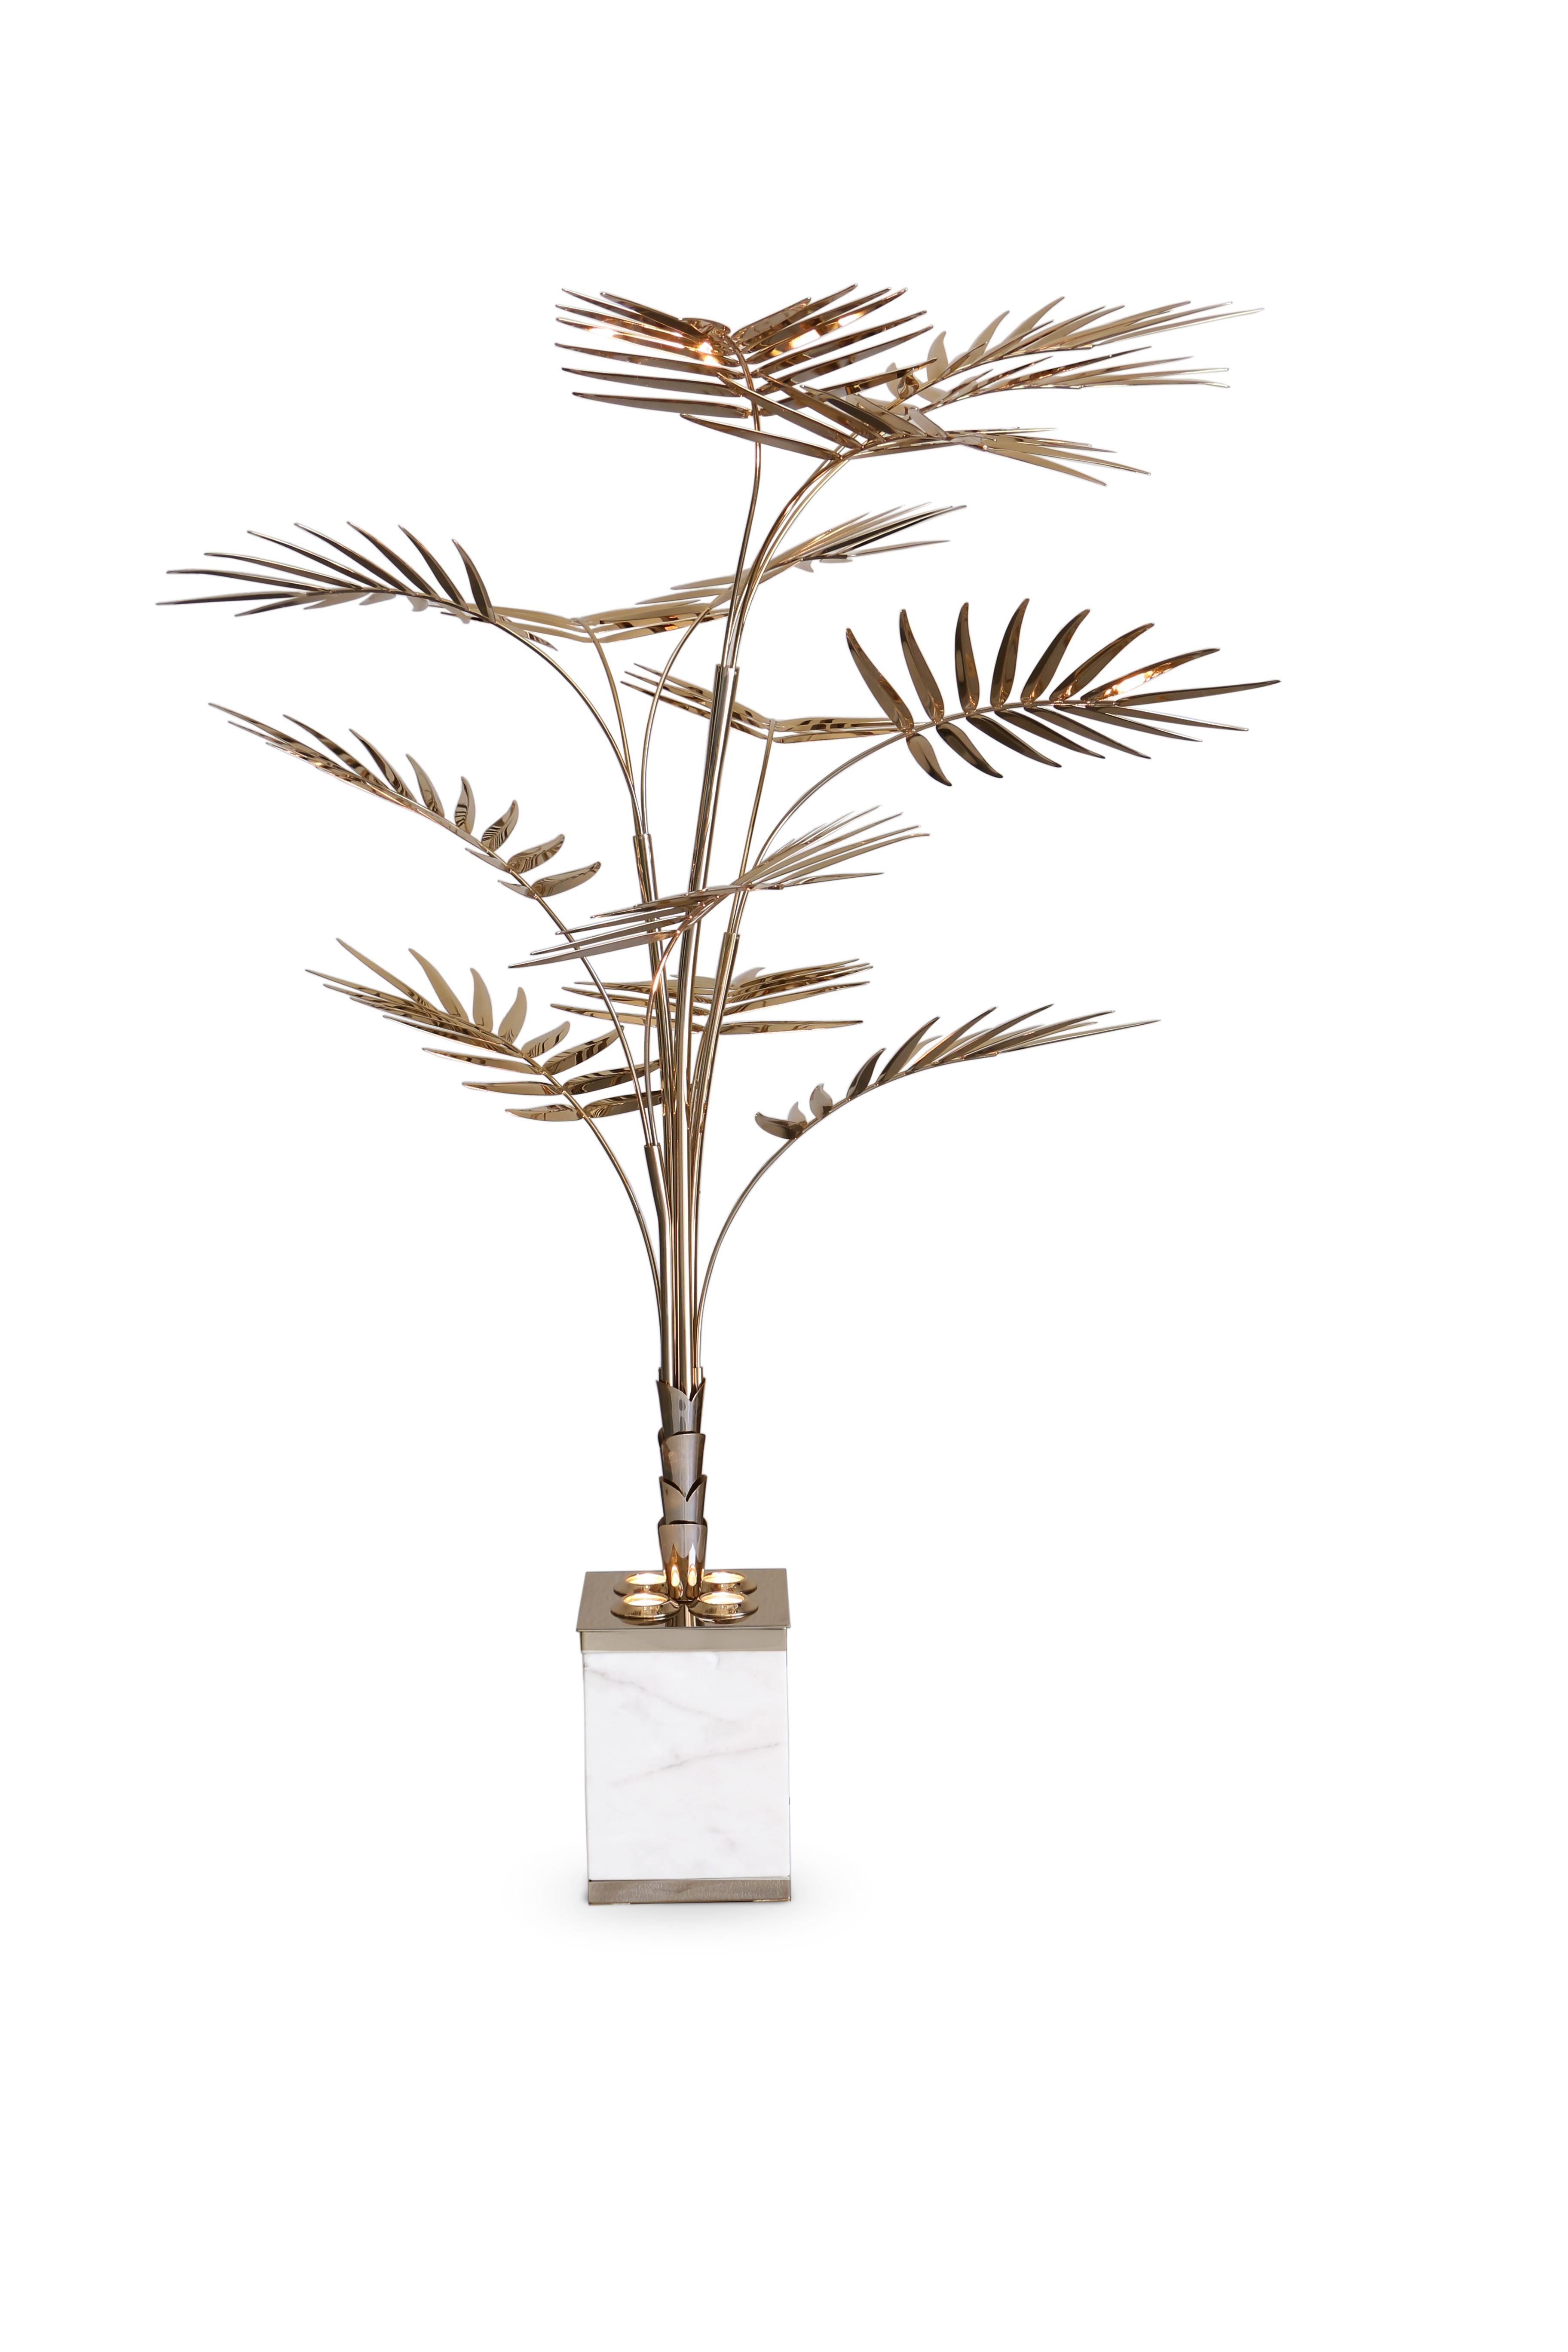 Ivete Sangalo is a tropical muse of Brazilian Pop Culture and also the inspiration behind this exotic light fixture. Using a mixture of materials such as brass and marble, this unique light fixture can serve as a table or floor lamp. Ivete is shaped